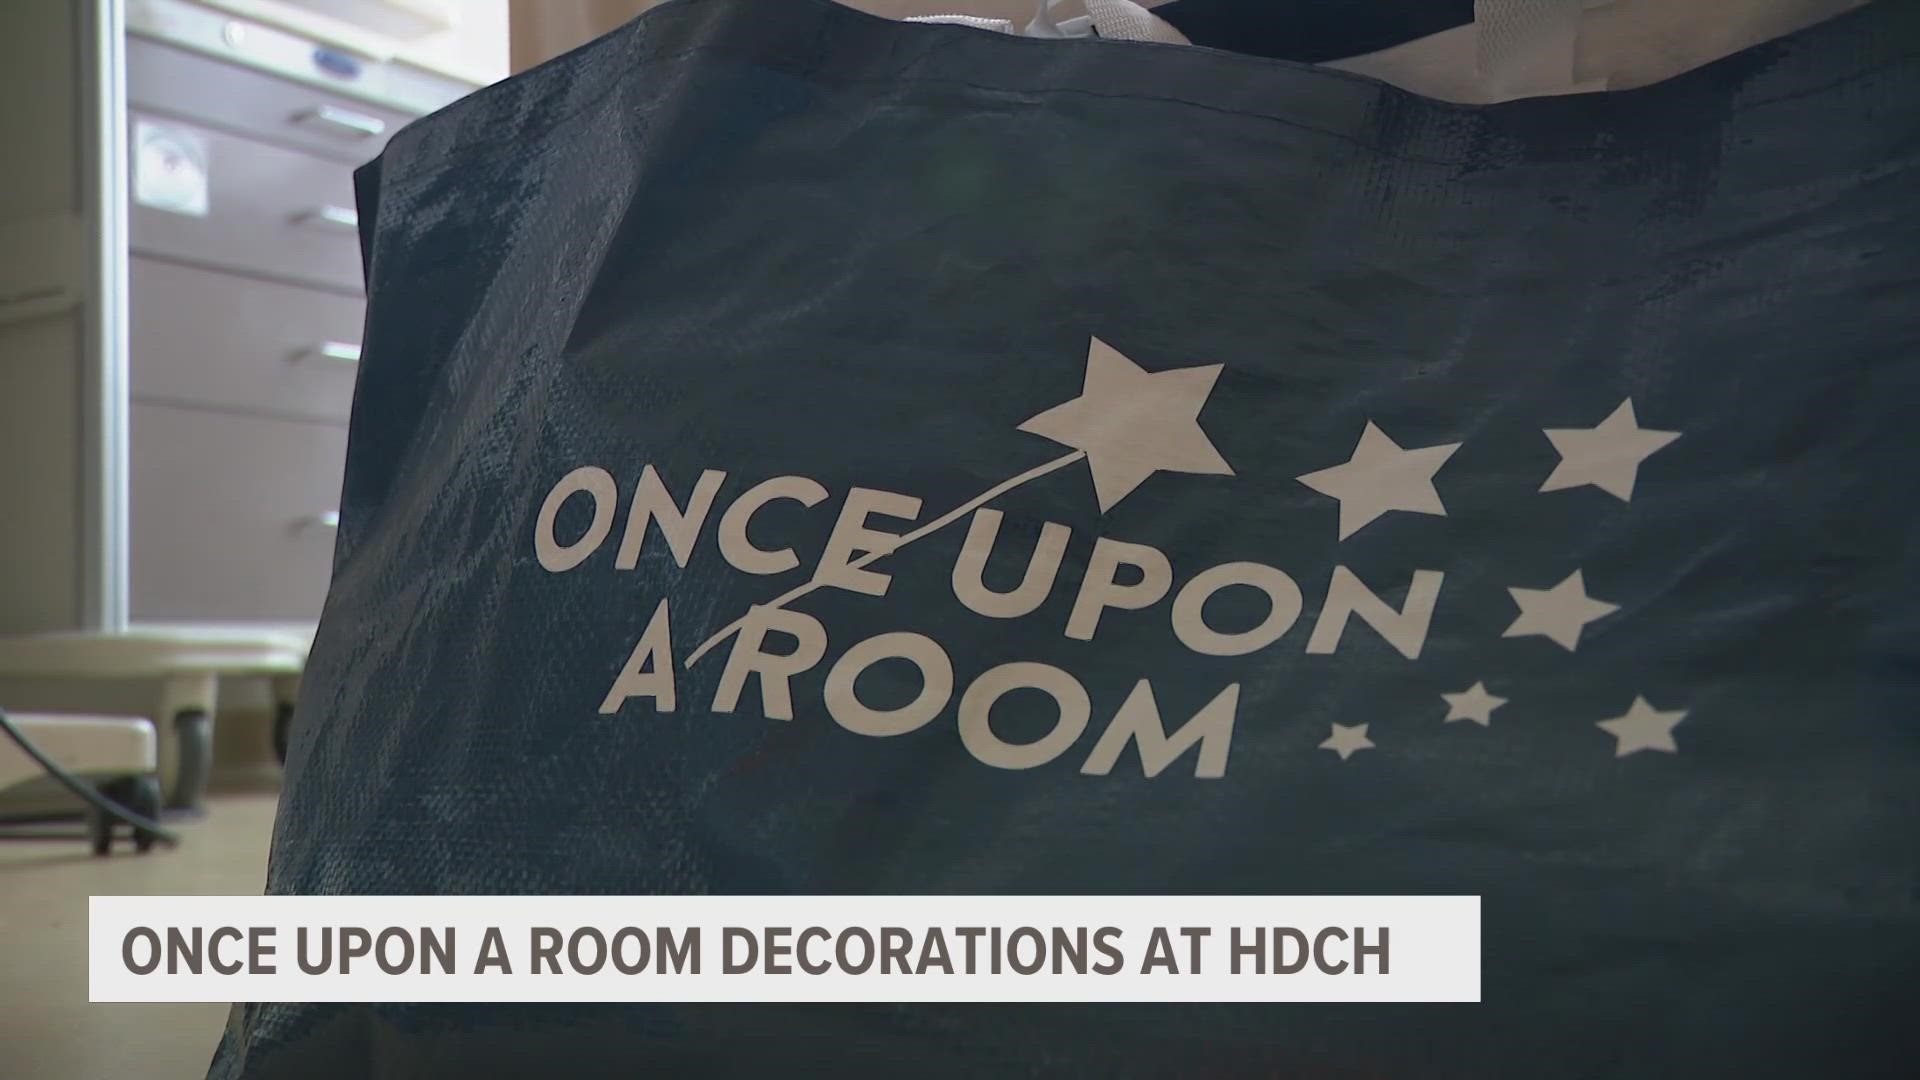 The non profit organization, "Once upon a room" surprised seven children today with new décor.